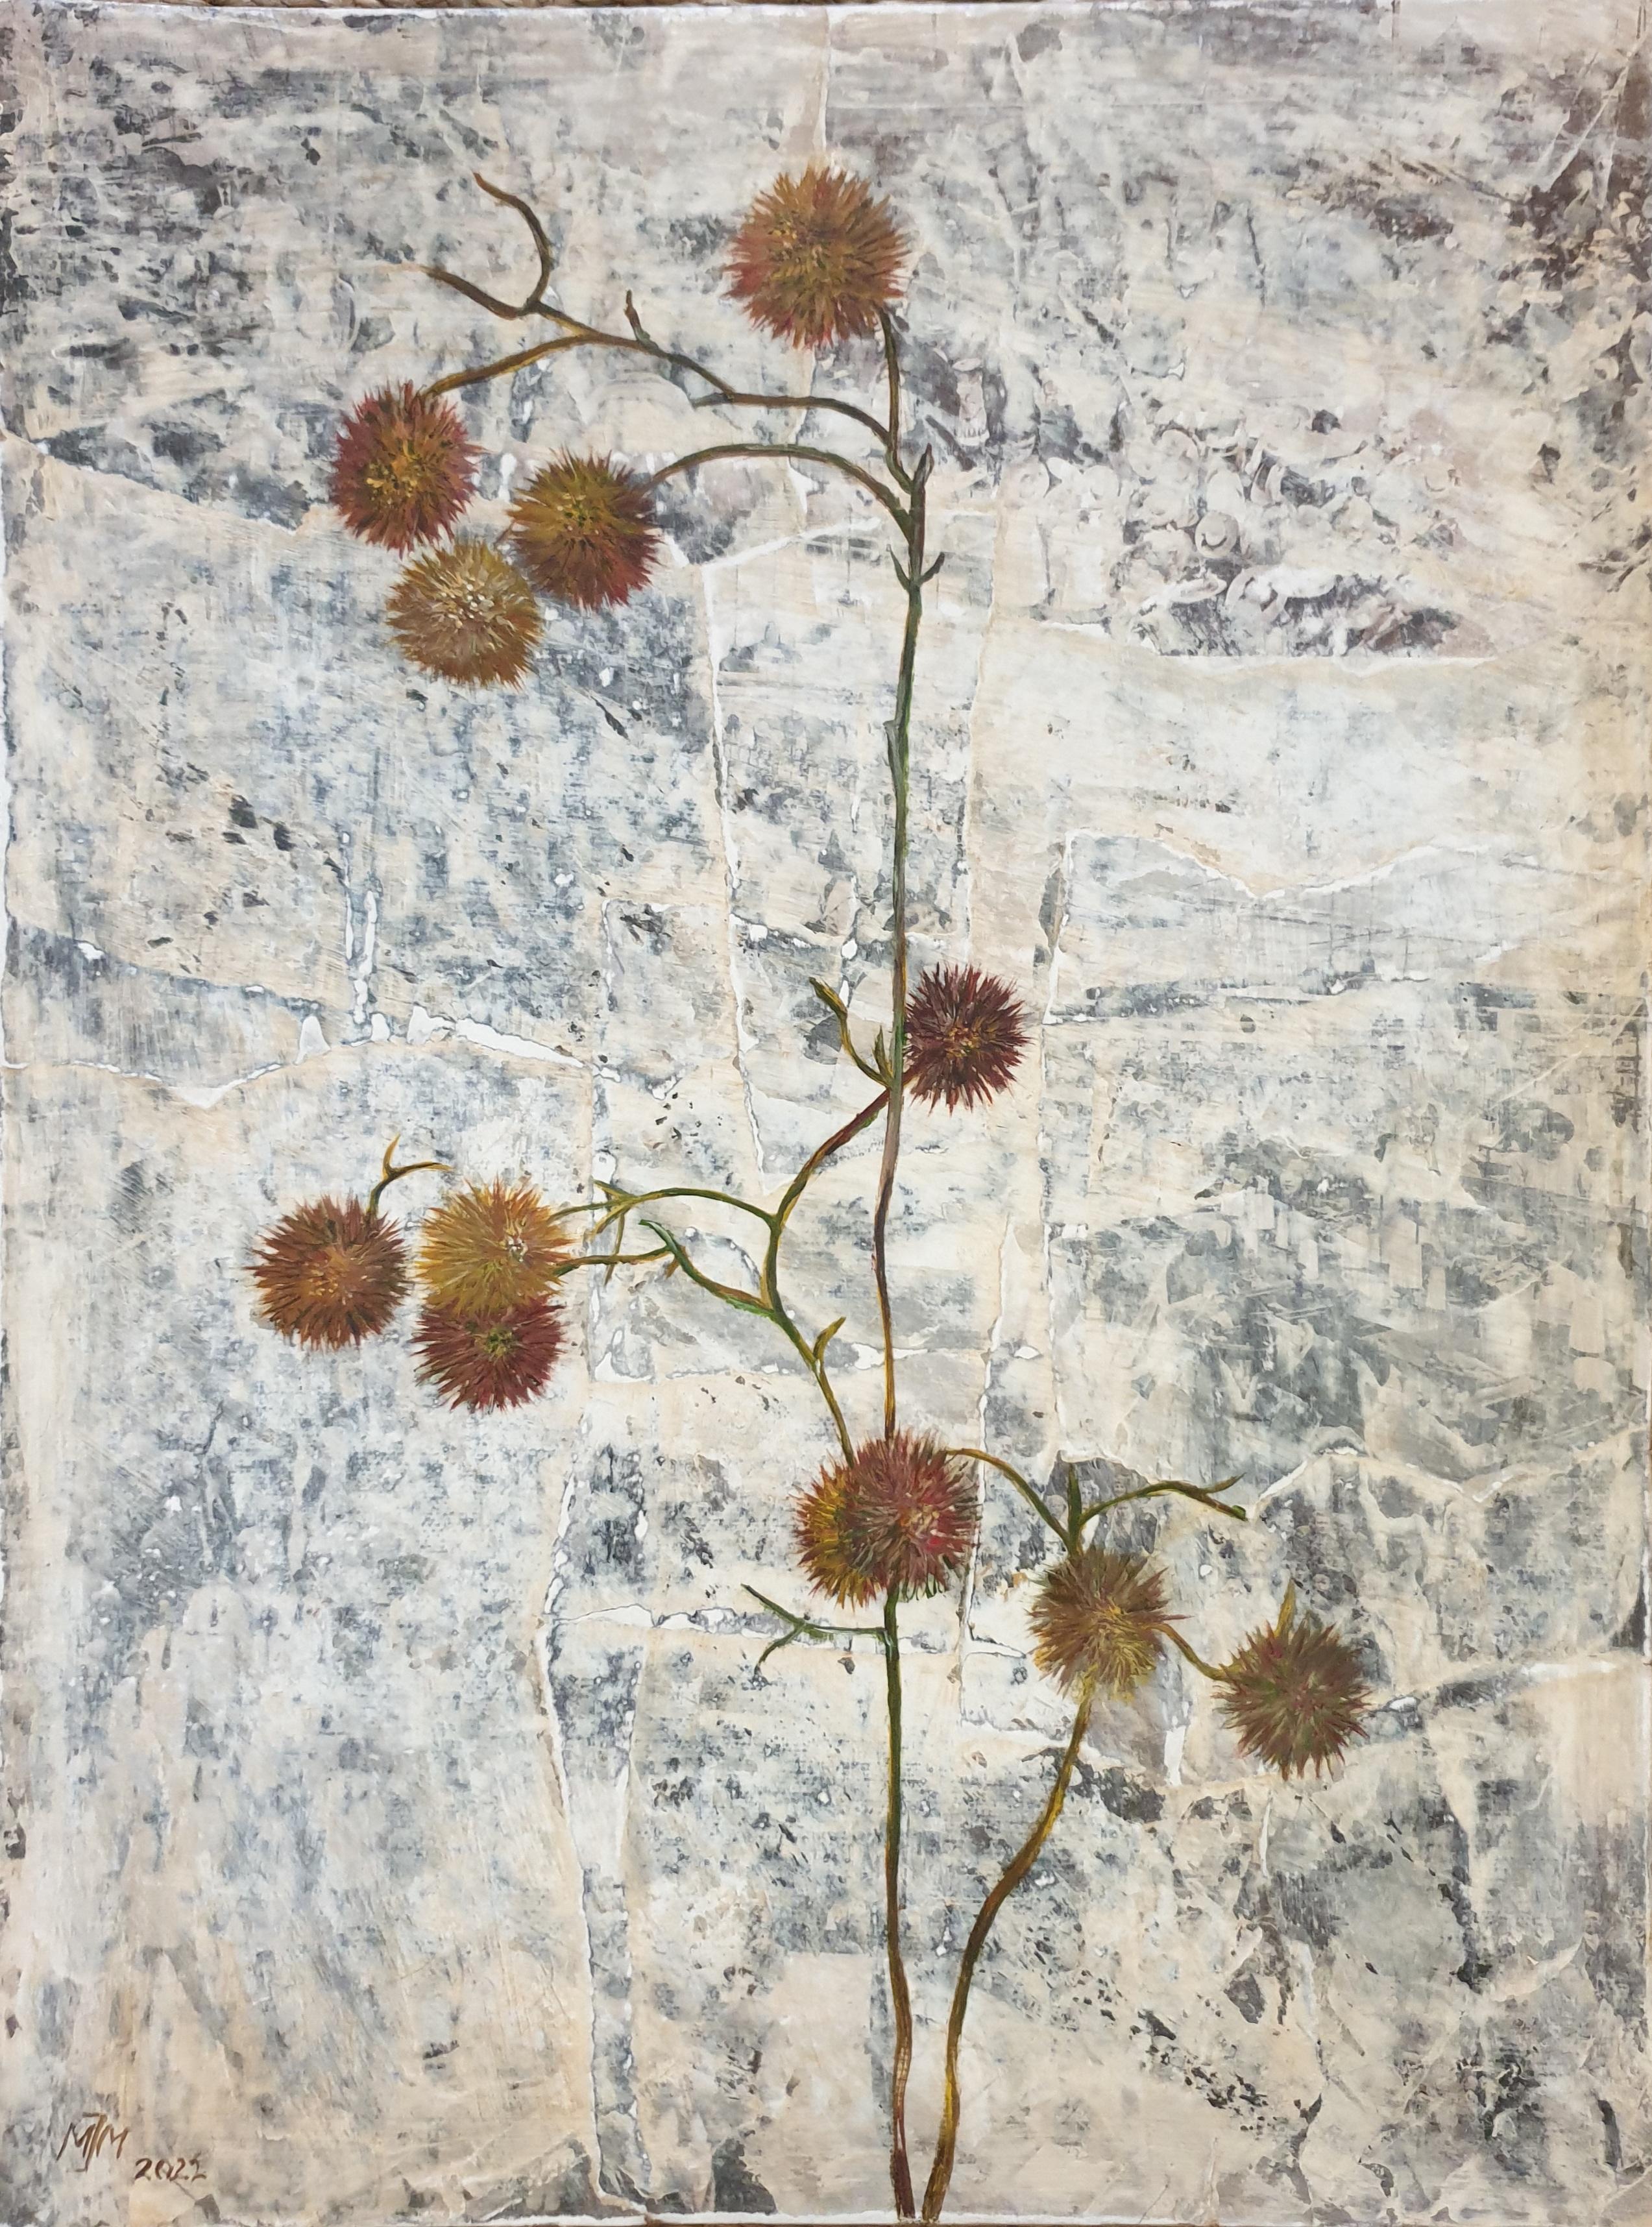 Gomphrena. Botanical Study, Découpage, Acrylic, Oil and Mixed-media on Board. - Mixed Media Art by Menno Modderman 